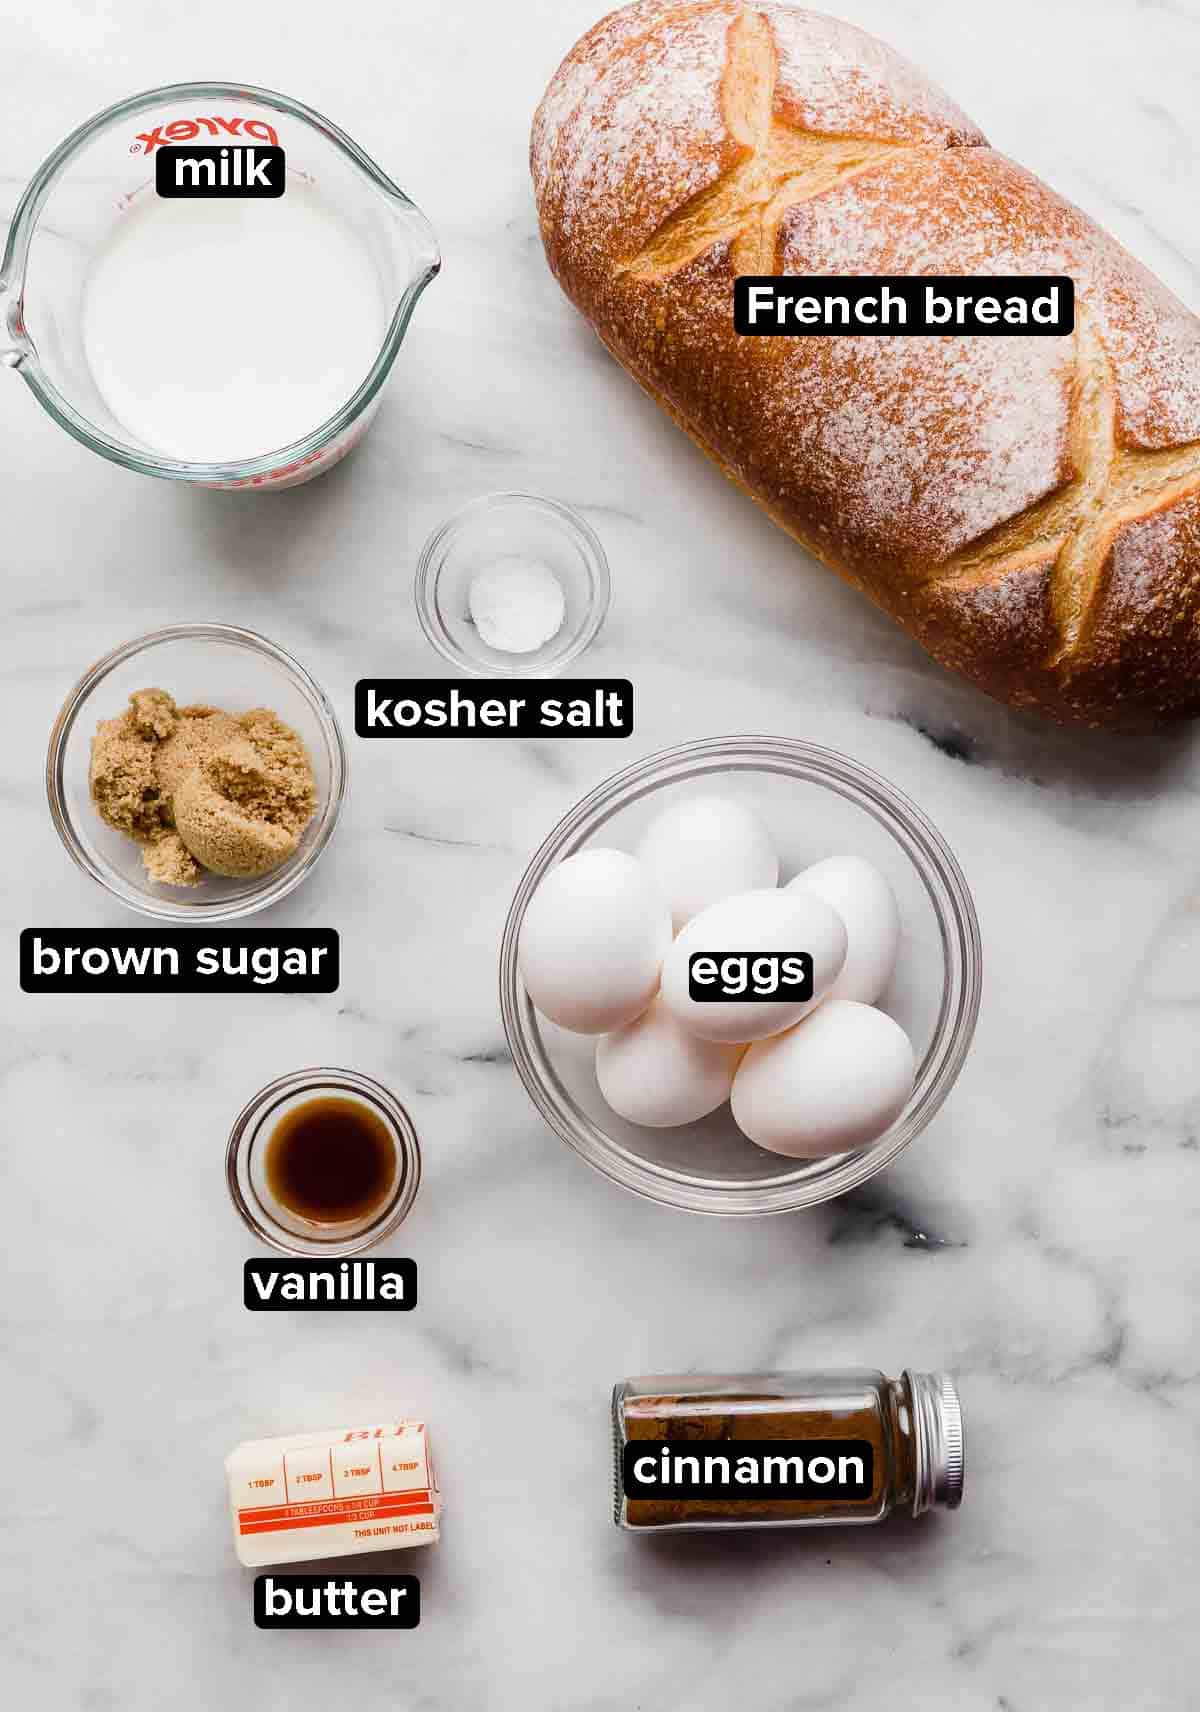 French Bread French Toast ingredients on a white background, ingredients include: French bread, eggs, butter, cinnamon, vanilla, brown sugar, and milk.